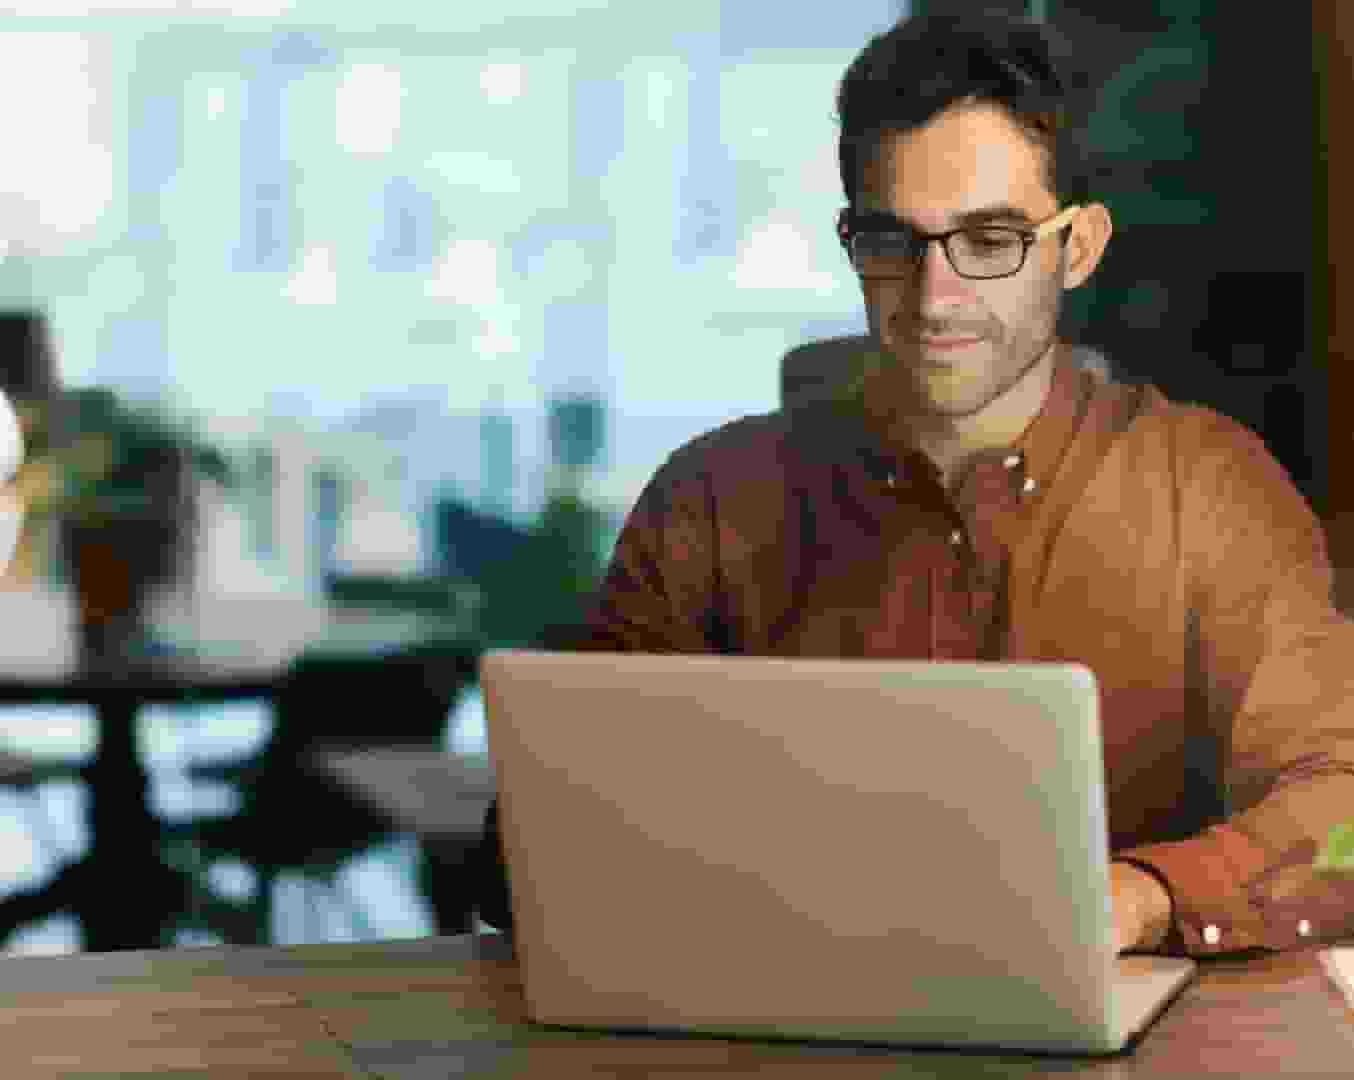 Man in red ochre shirt concentrating while working on laptop